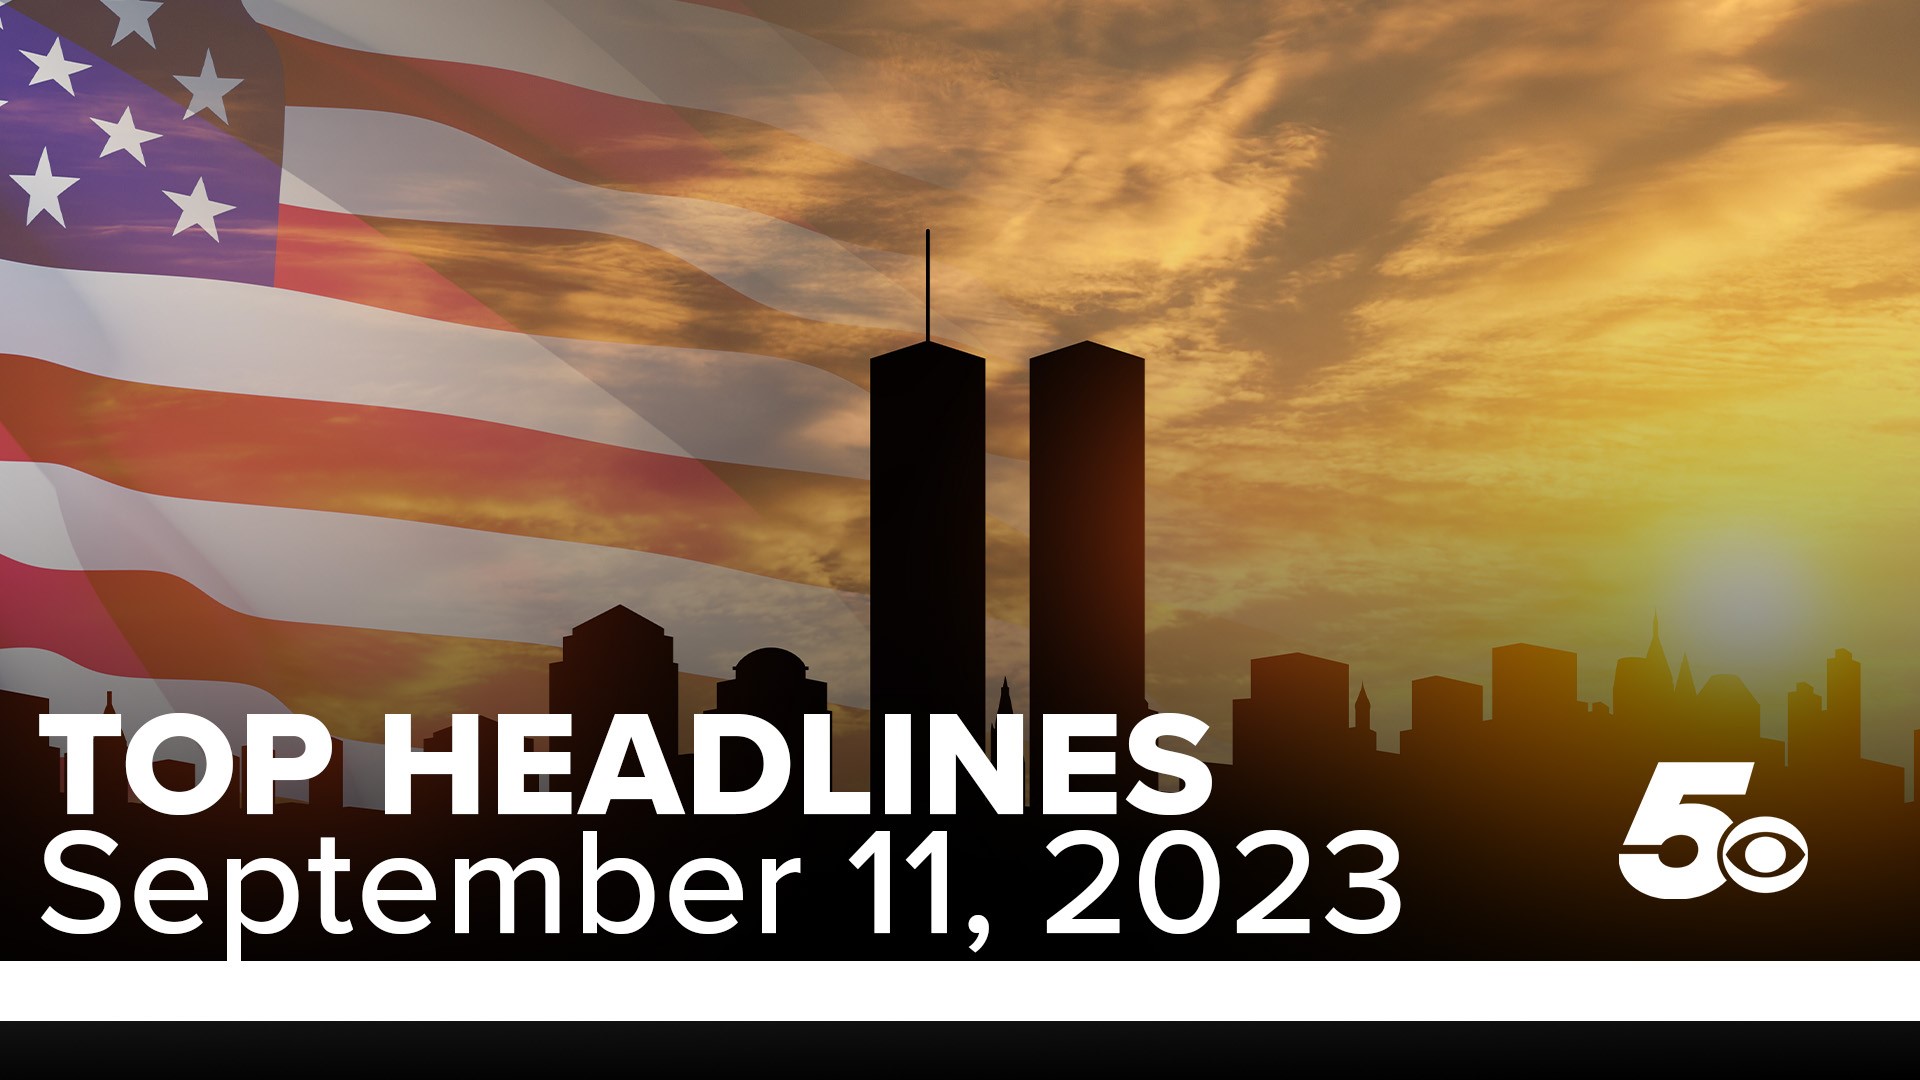 Watch today's top headlines as we remember 9/11 and those who lost their lives on this tragic date.